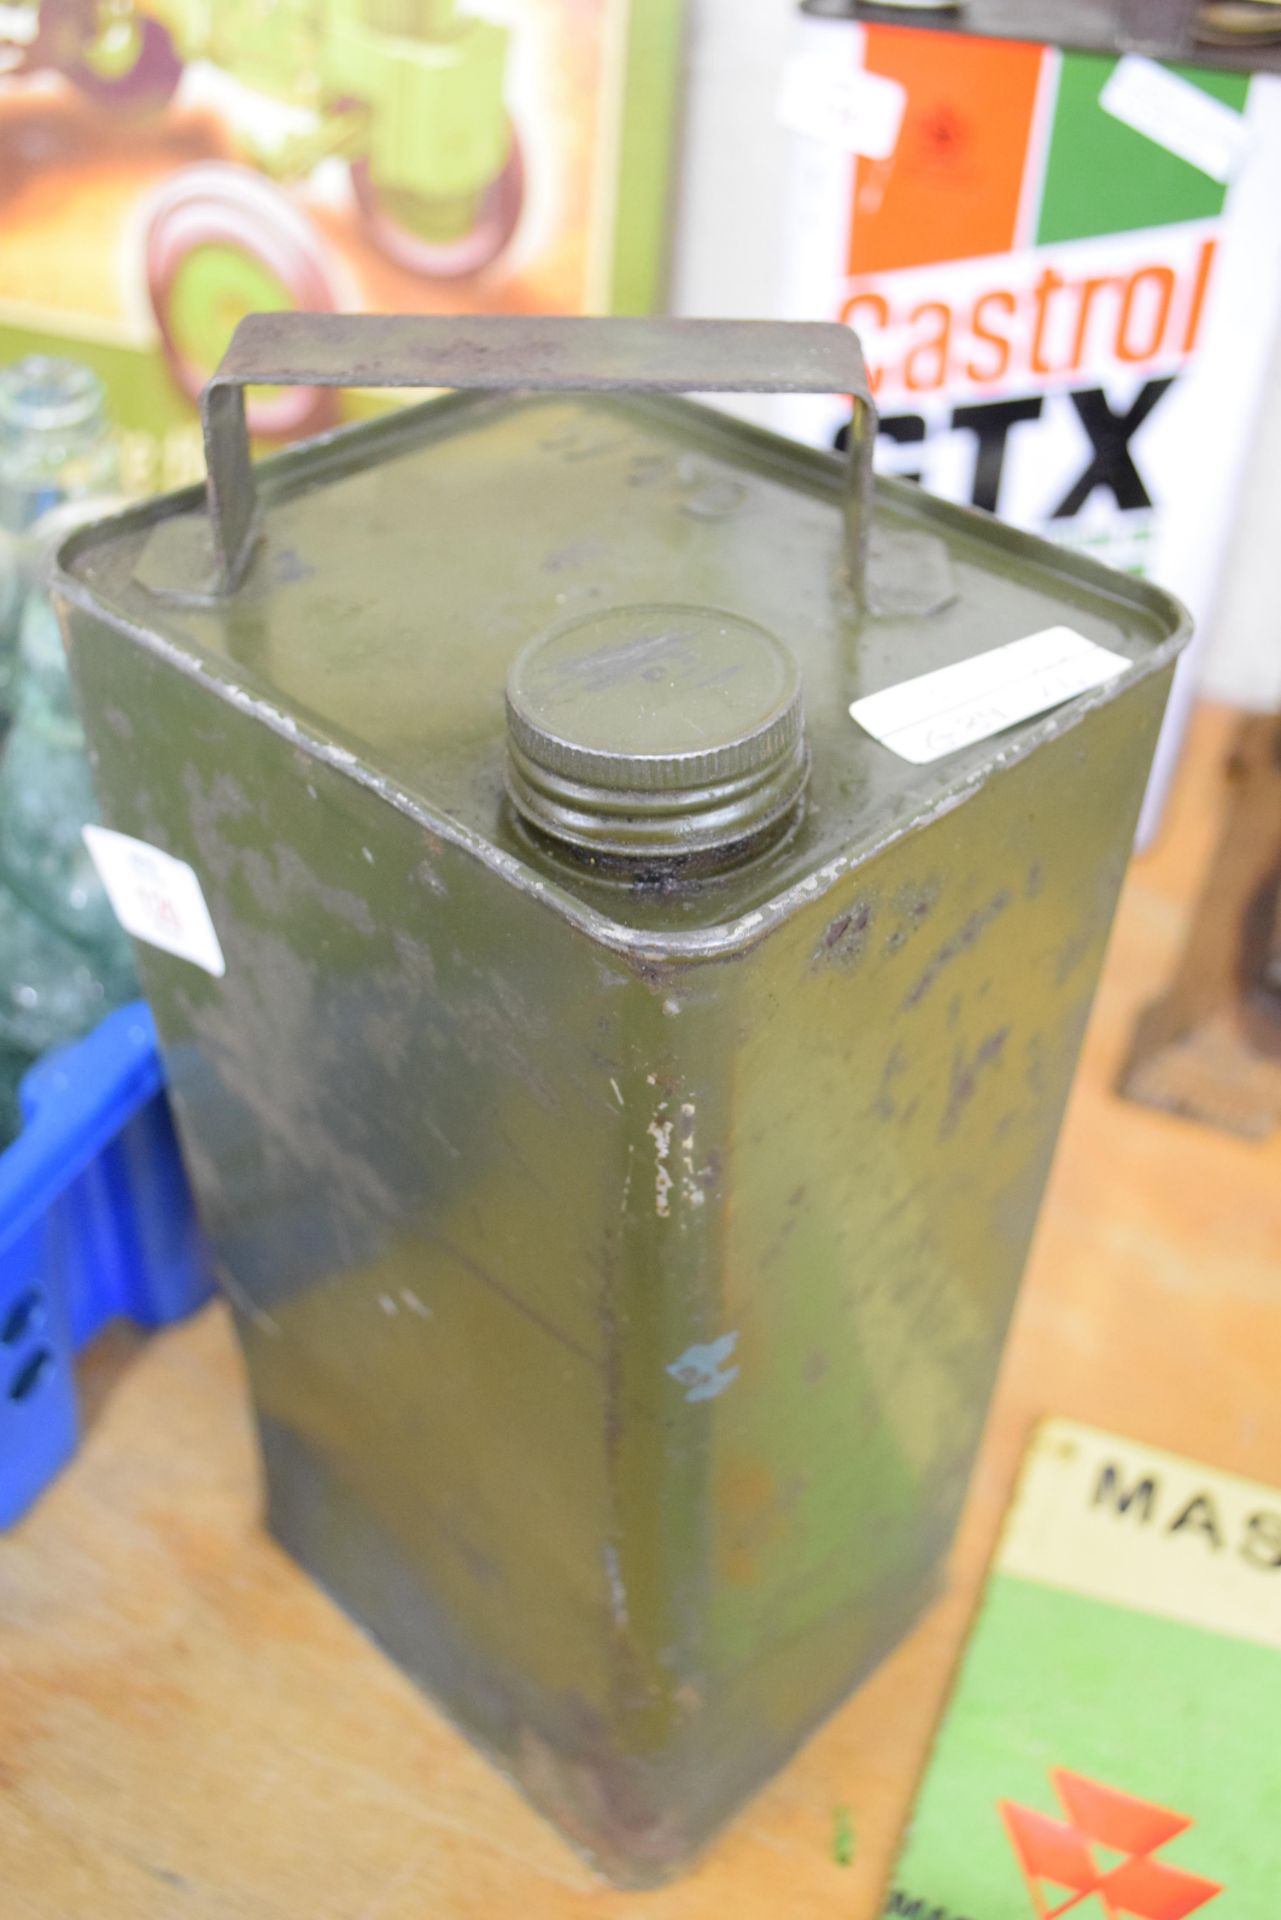 Green painted War Dept fuel can